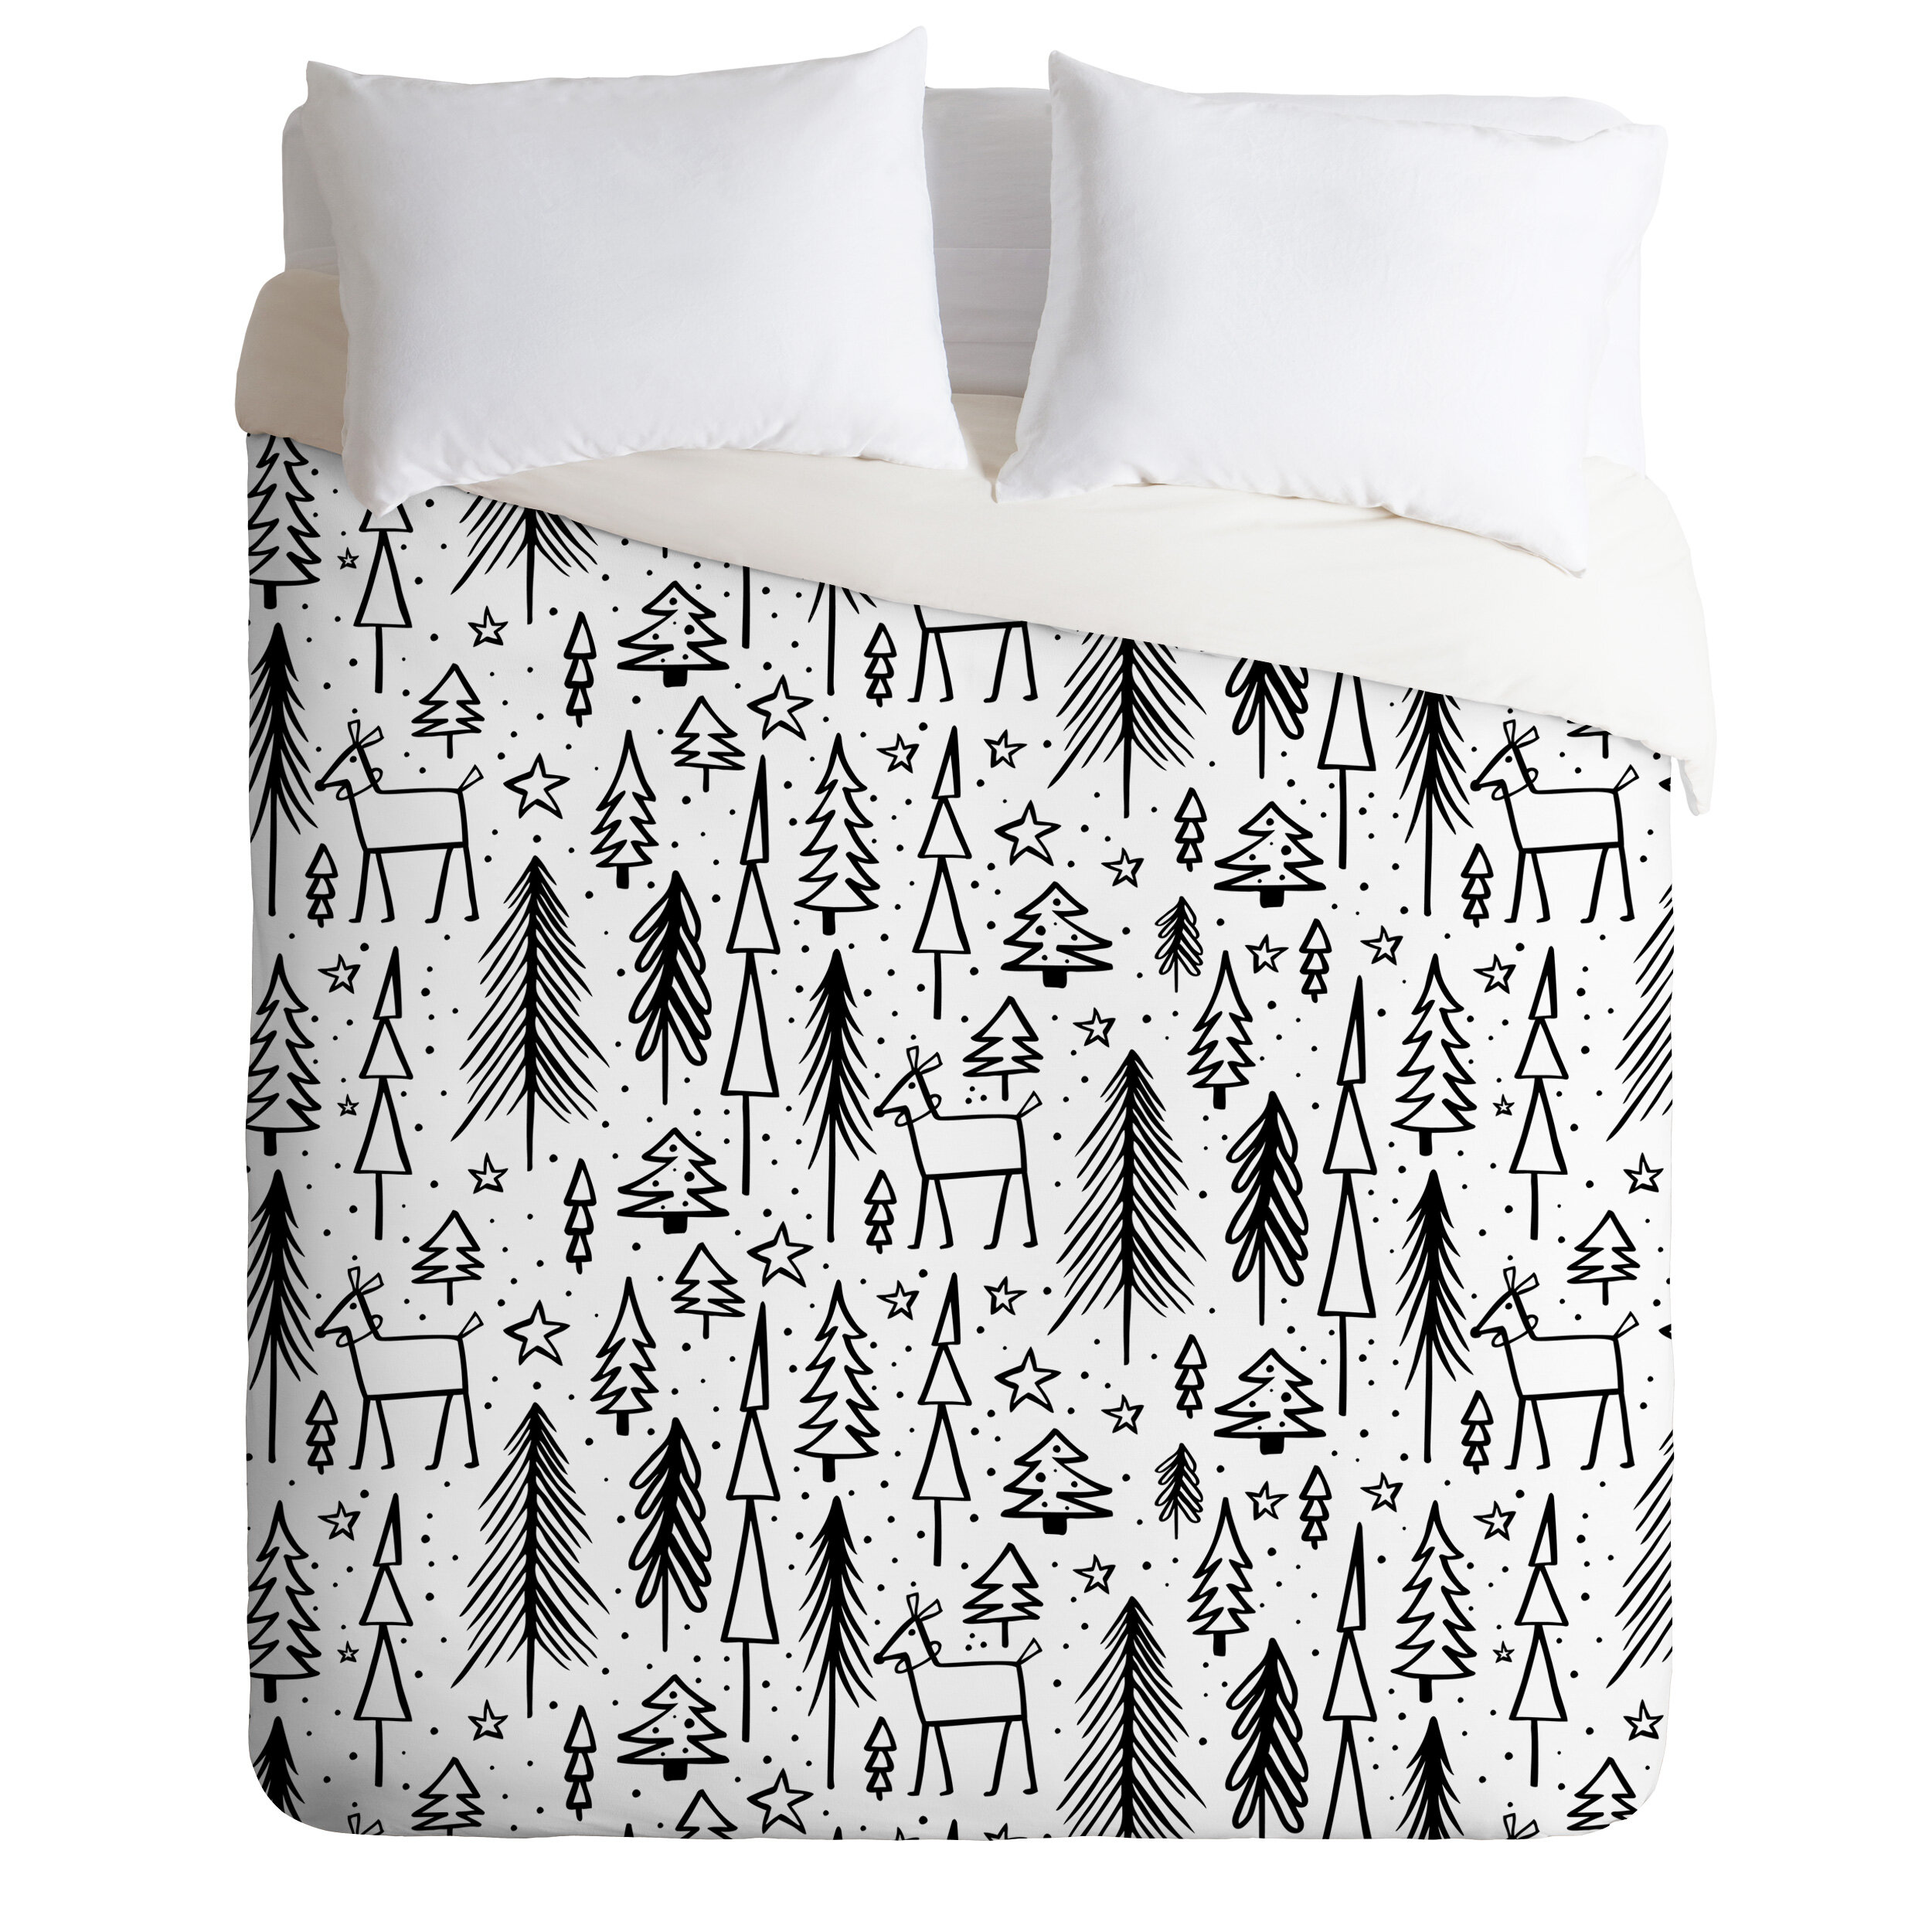 winter duvet covers at mr price home